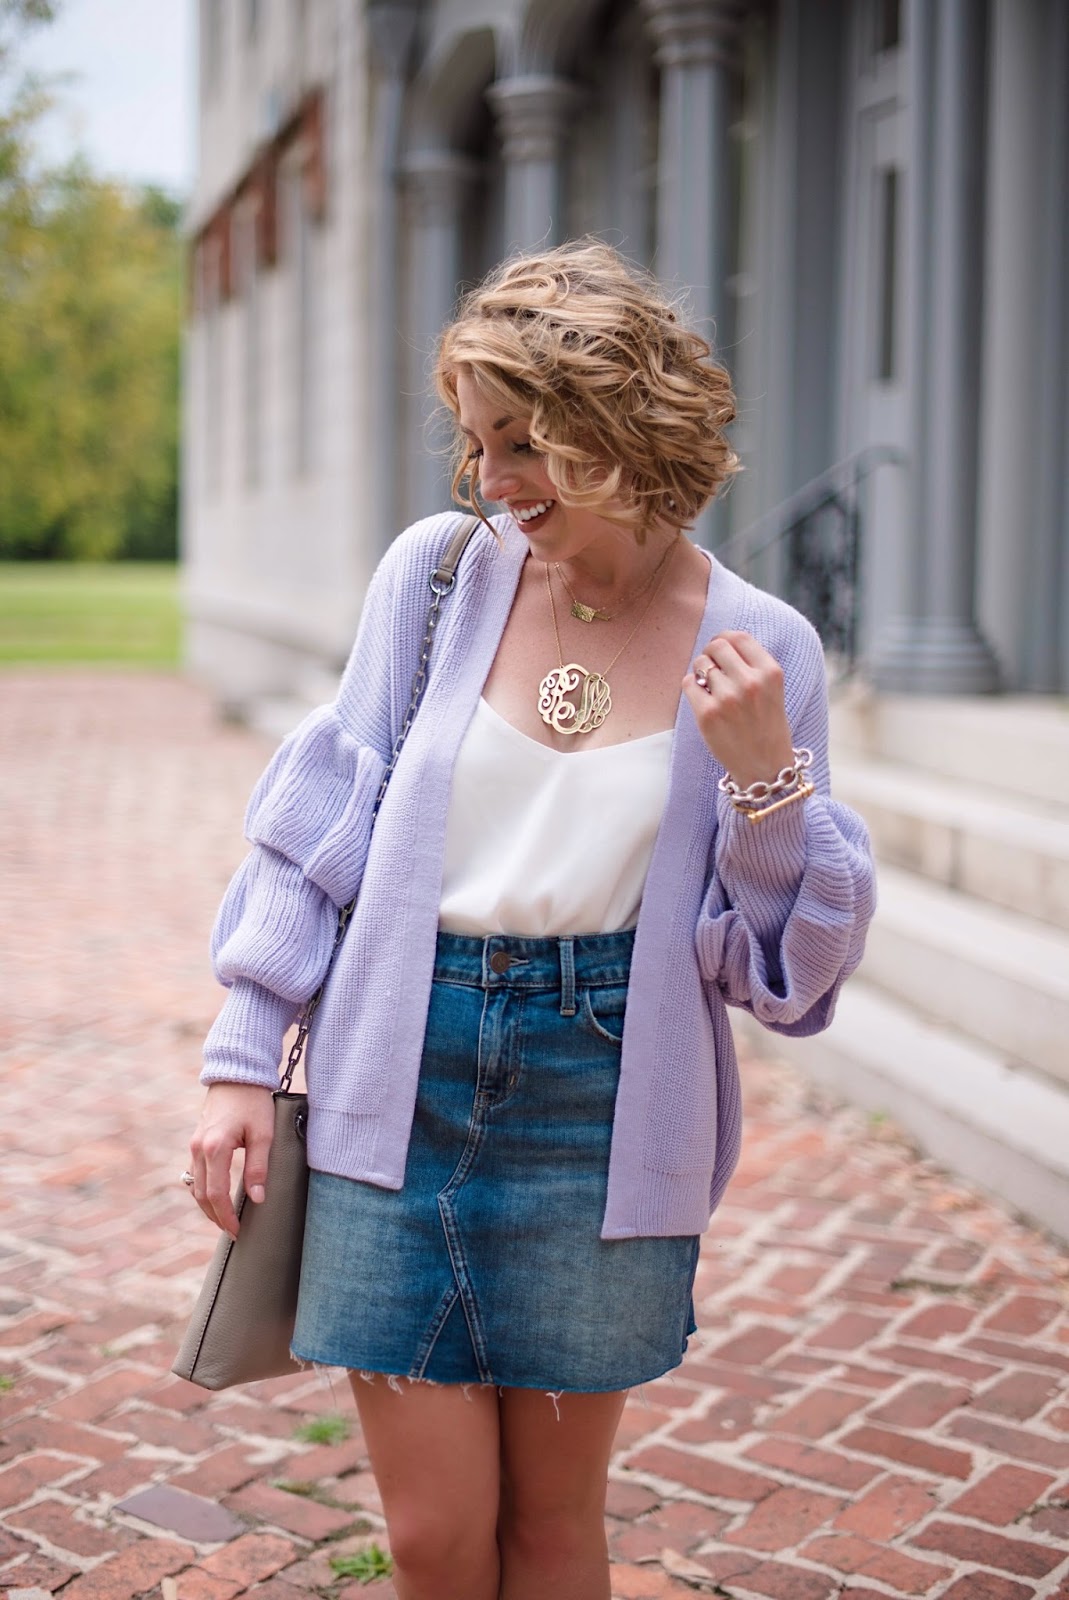 Ruffle Sleeve Cardigan - Something Delightful Blog (click through for the full post)